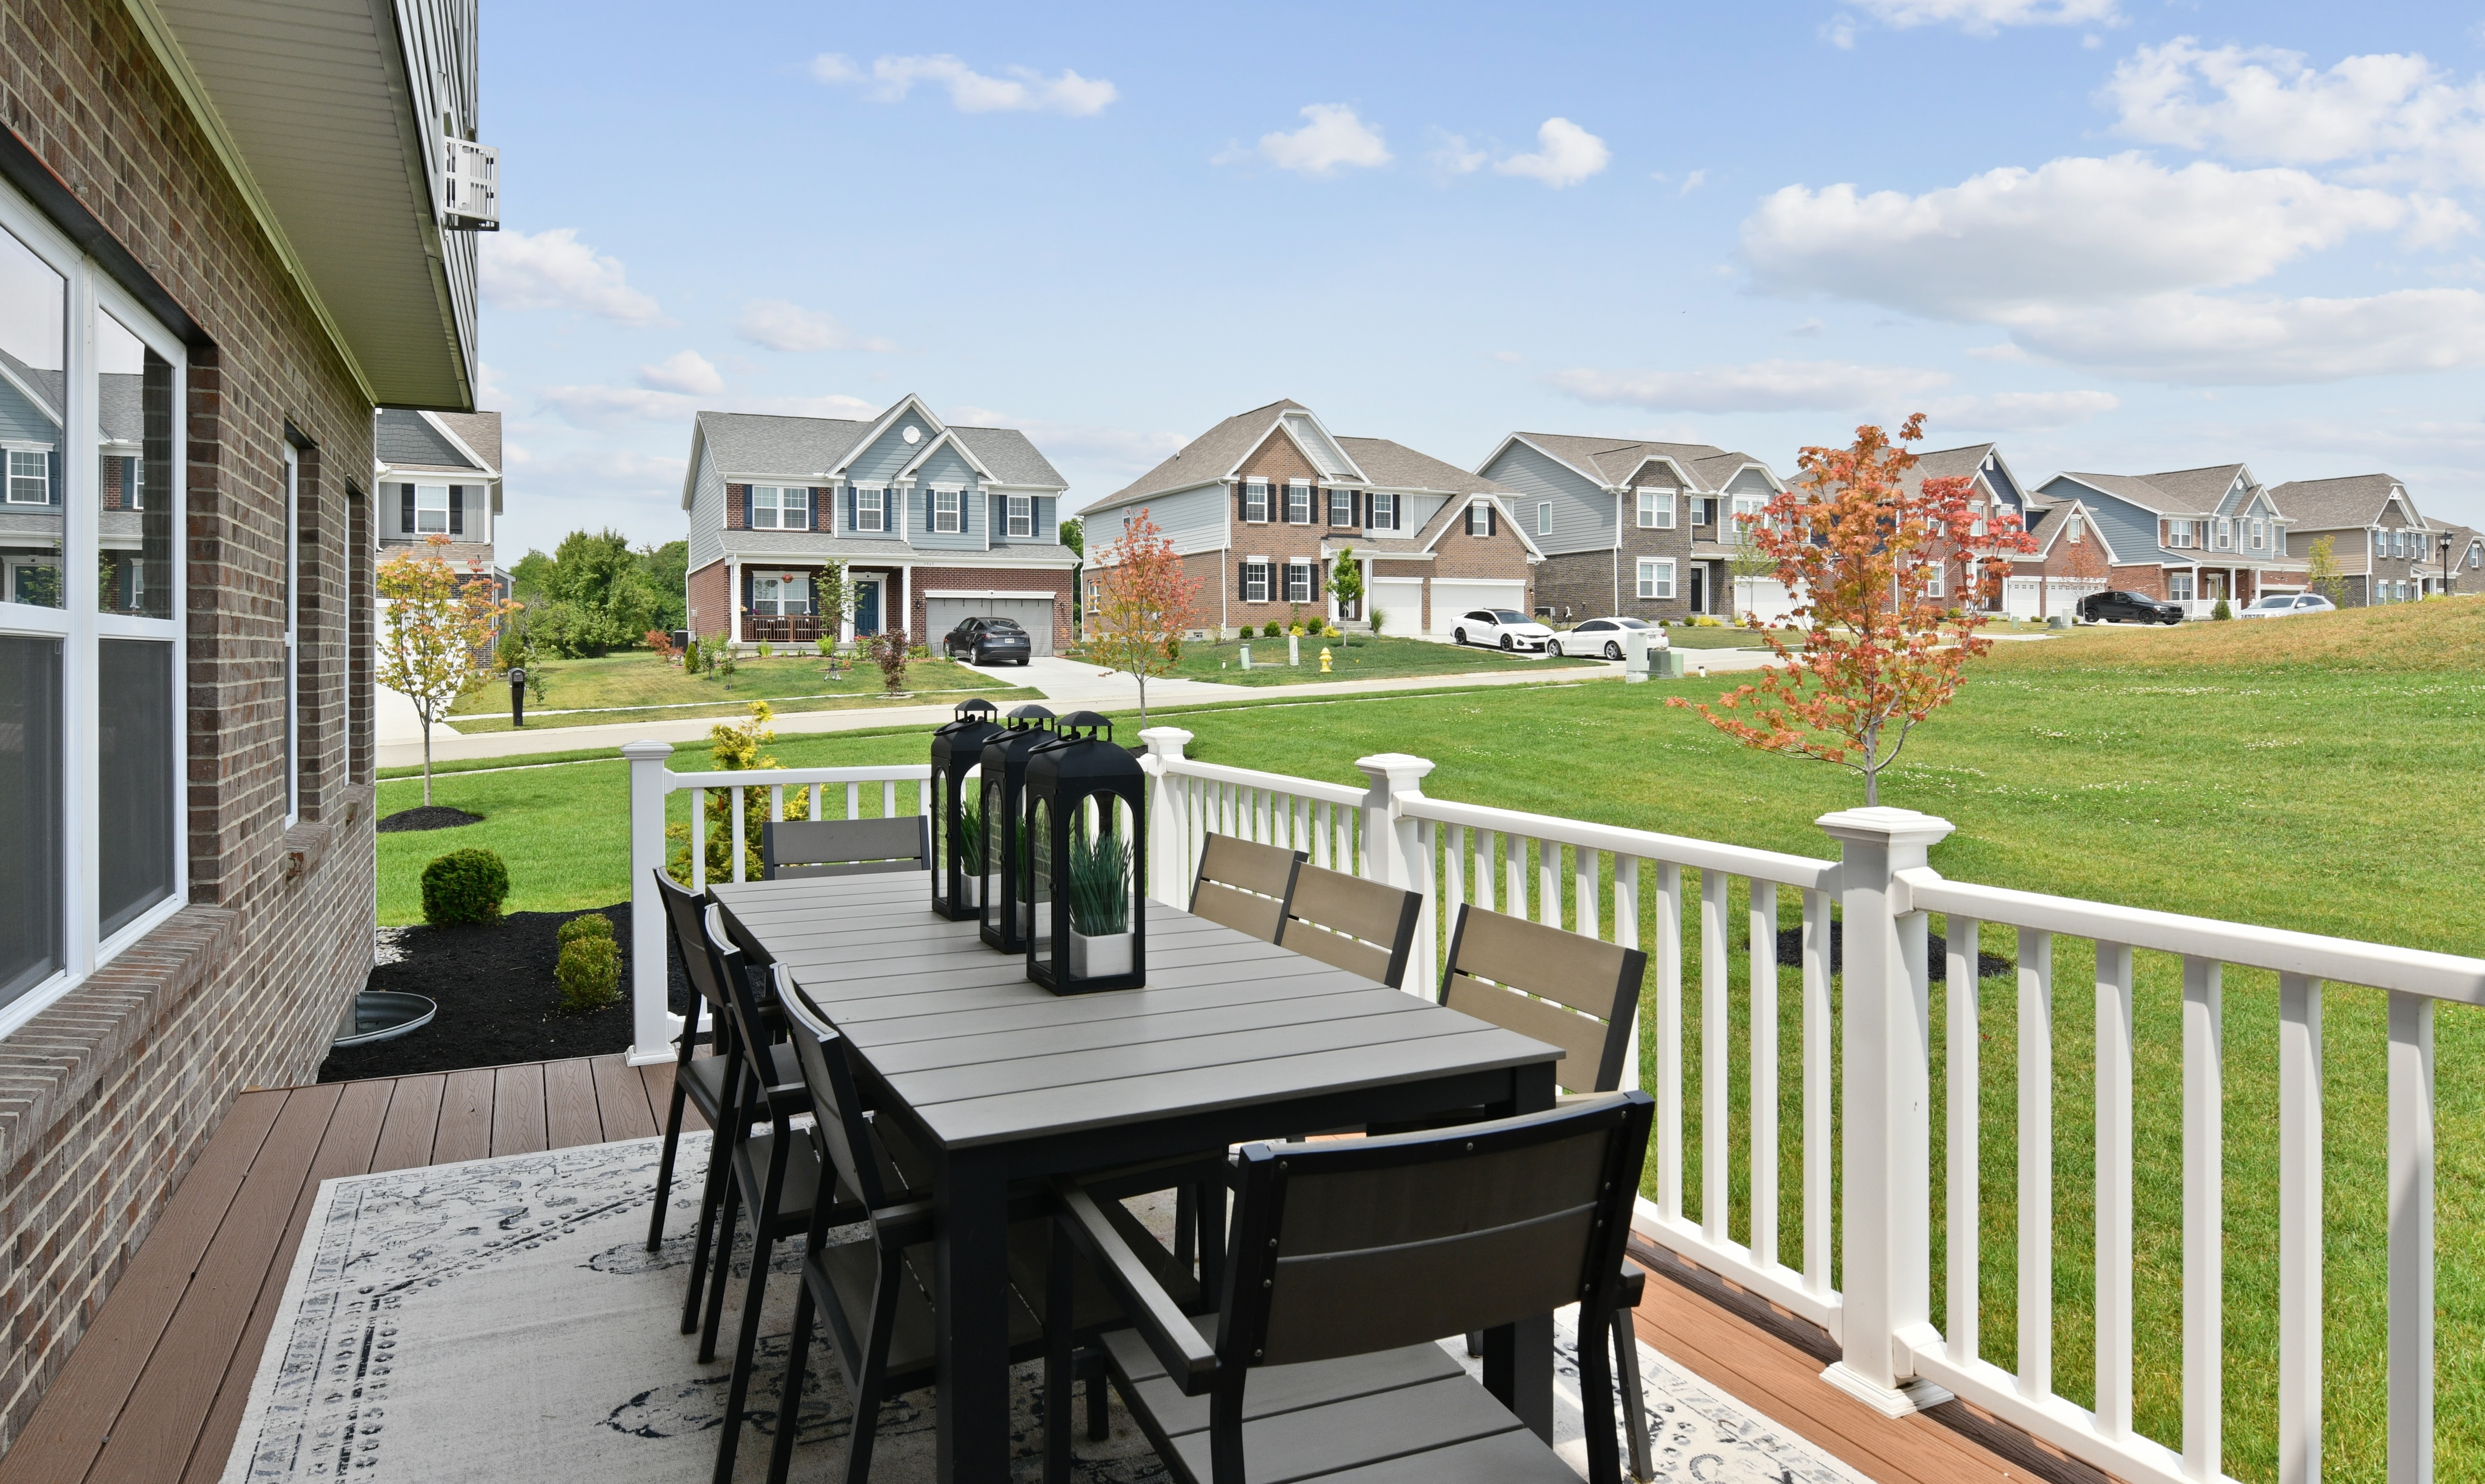 Dining area on a deck of new home in Liberty Township